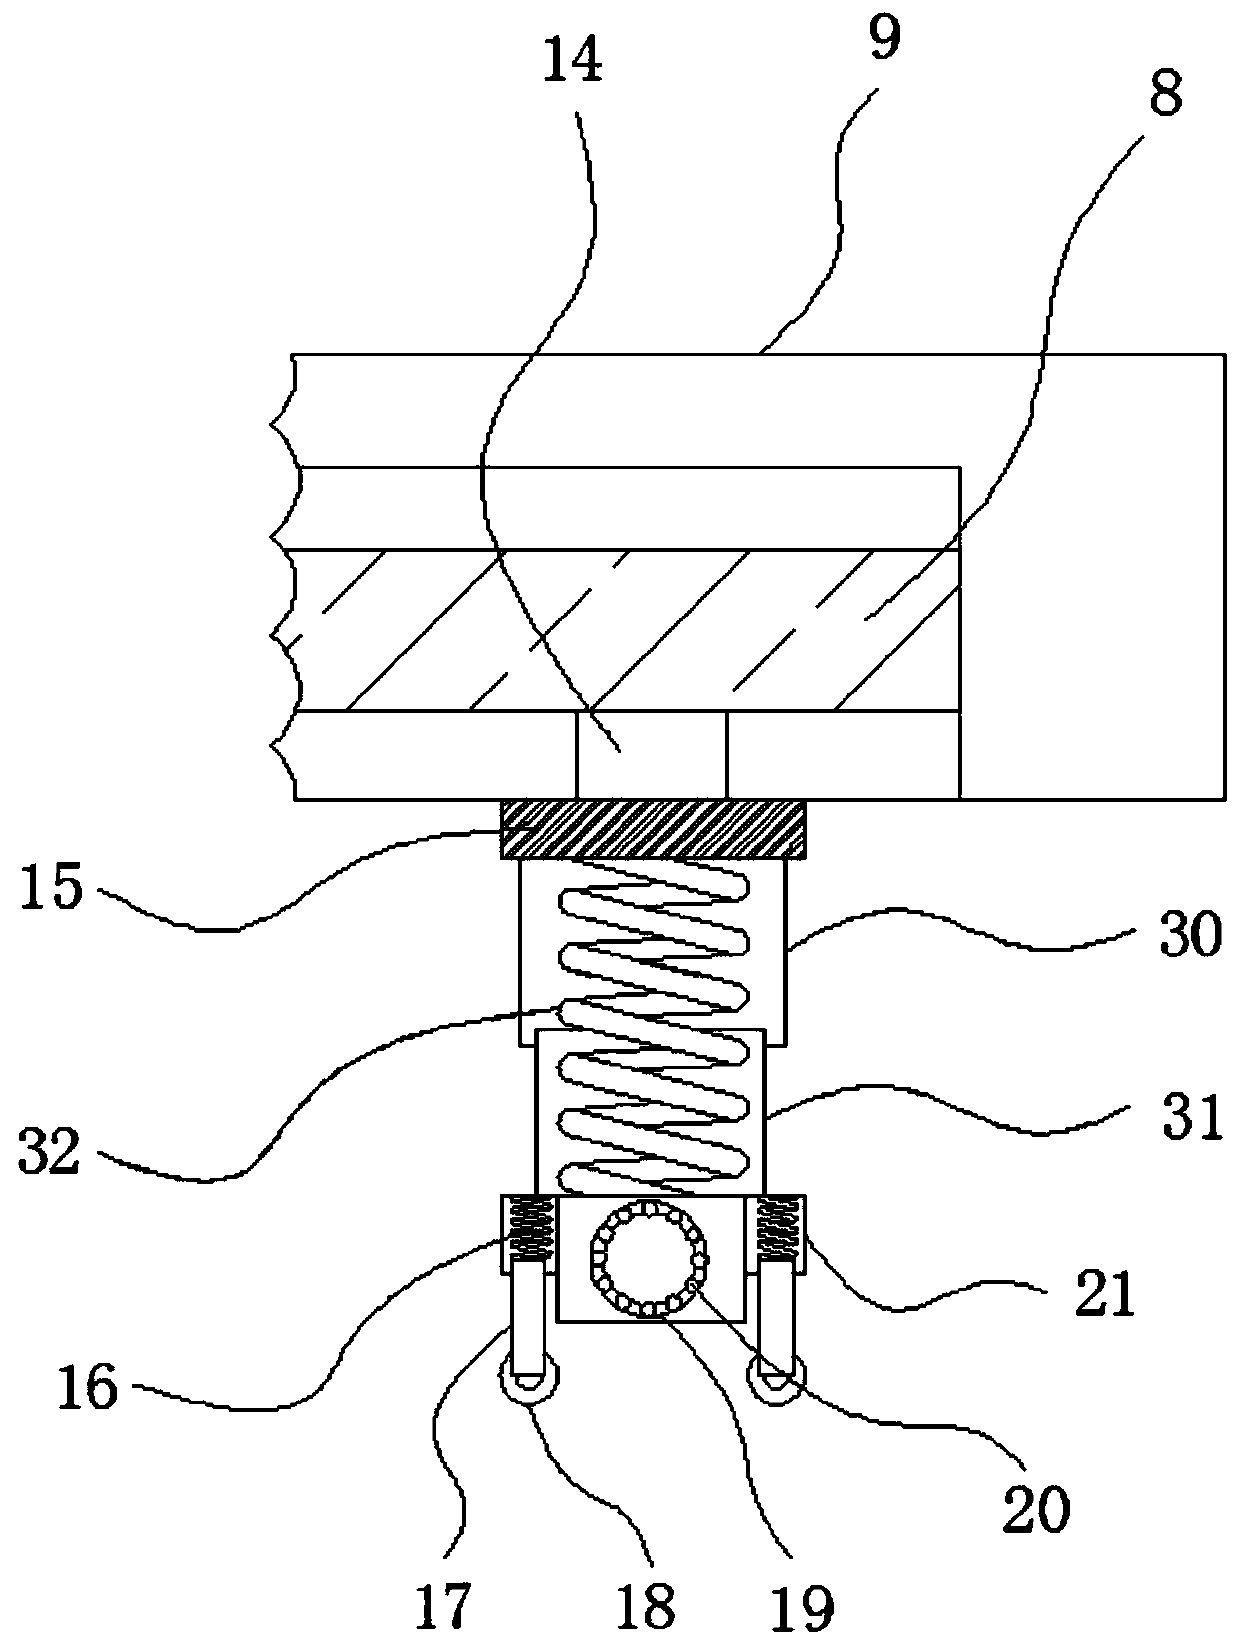 Cable traction winding device for ocean engineering